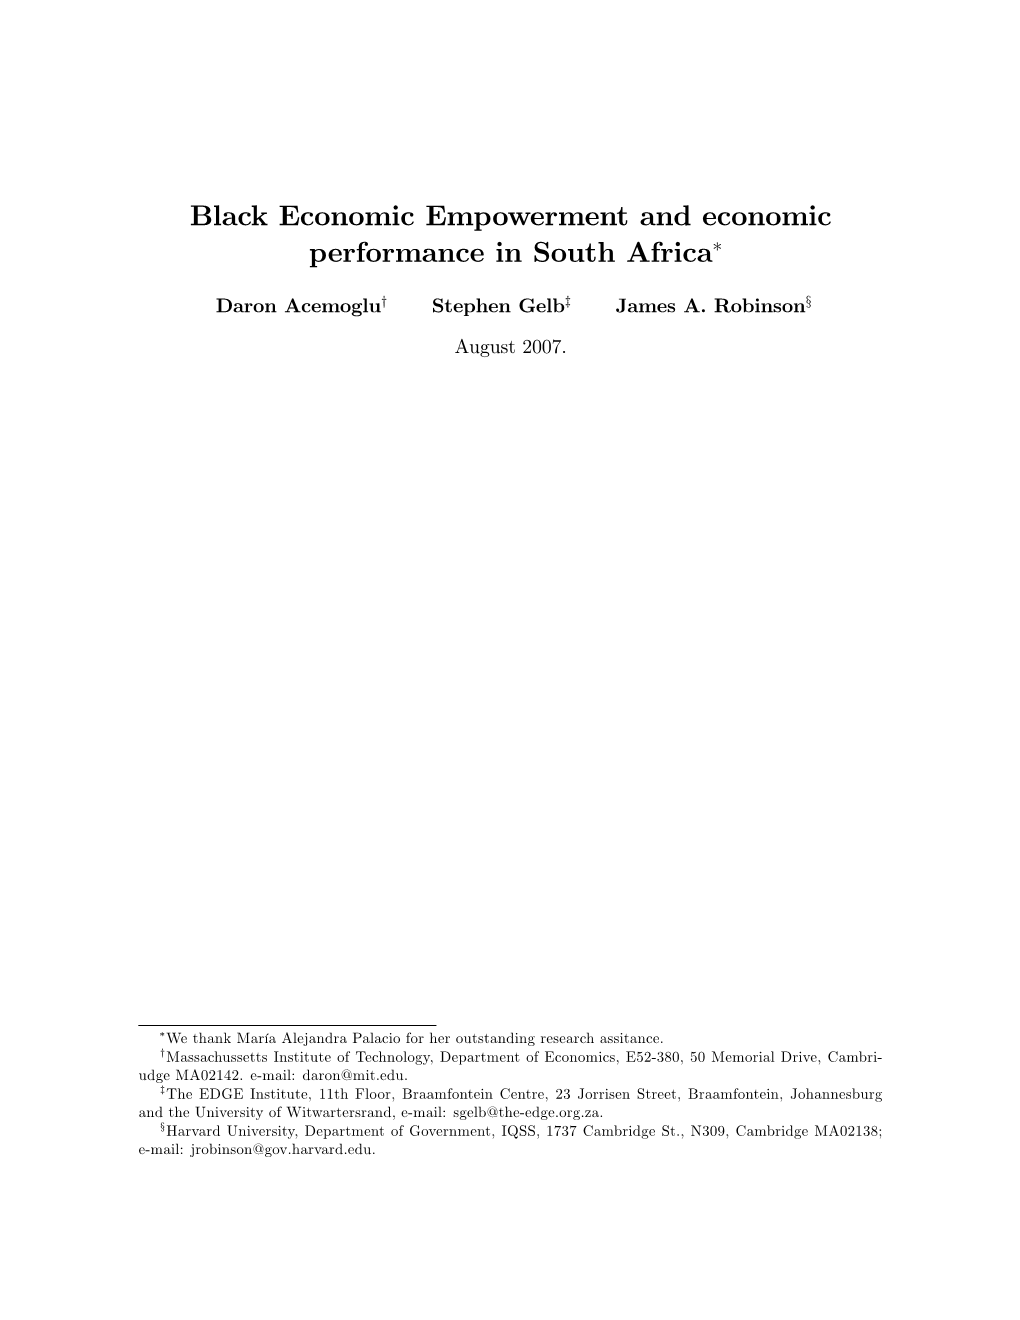 Black Economic Empowerment and Economic Performance in South Africa